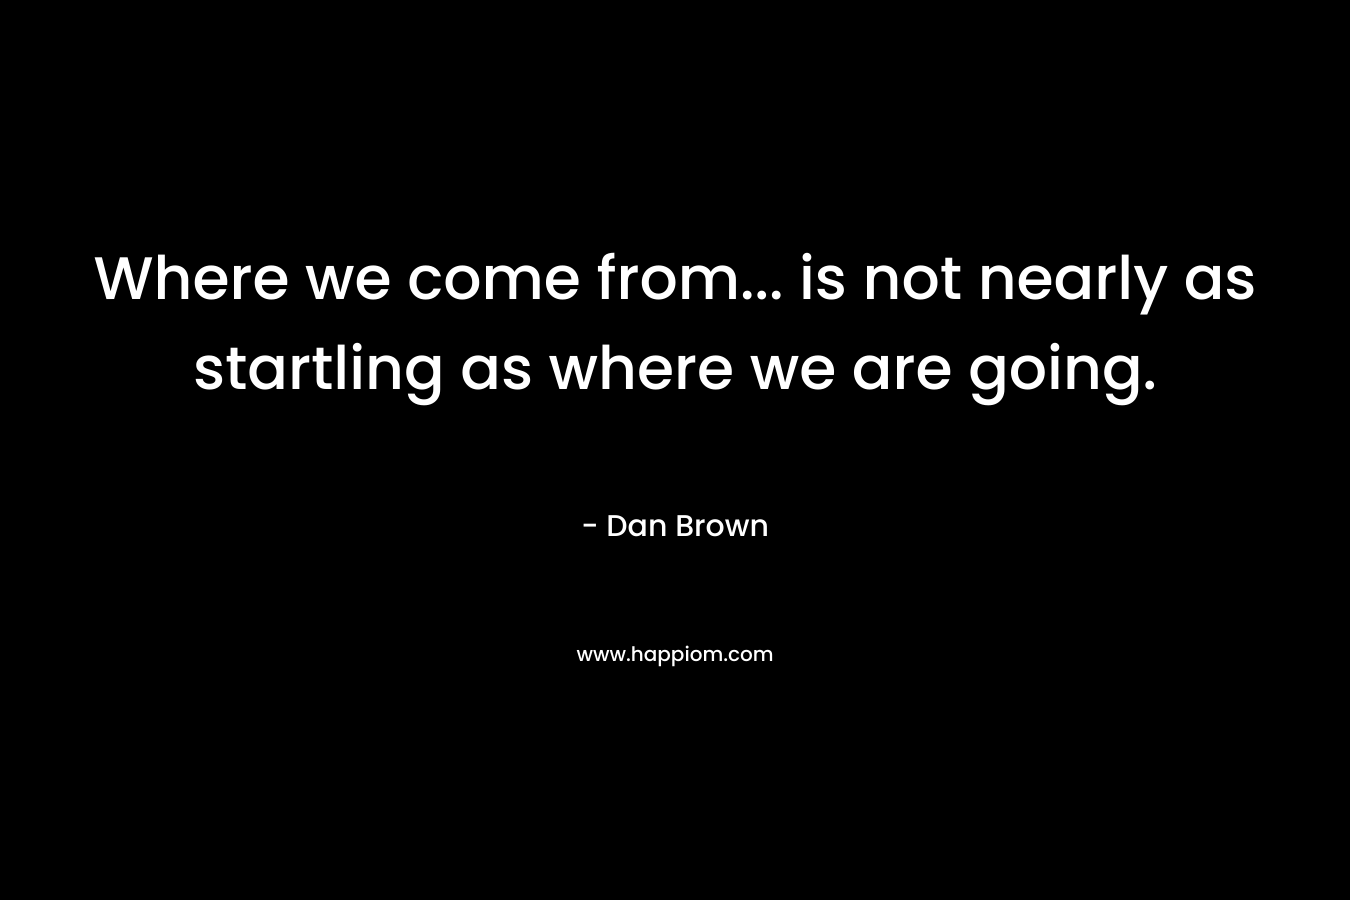 Where we come from... is not nearly as startling as where we are going.